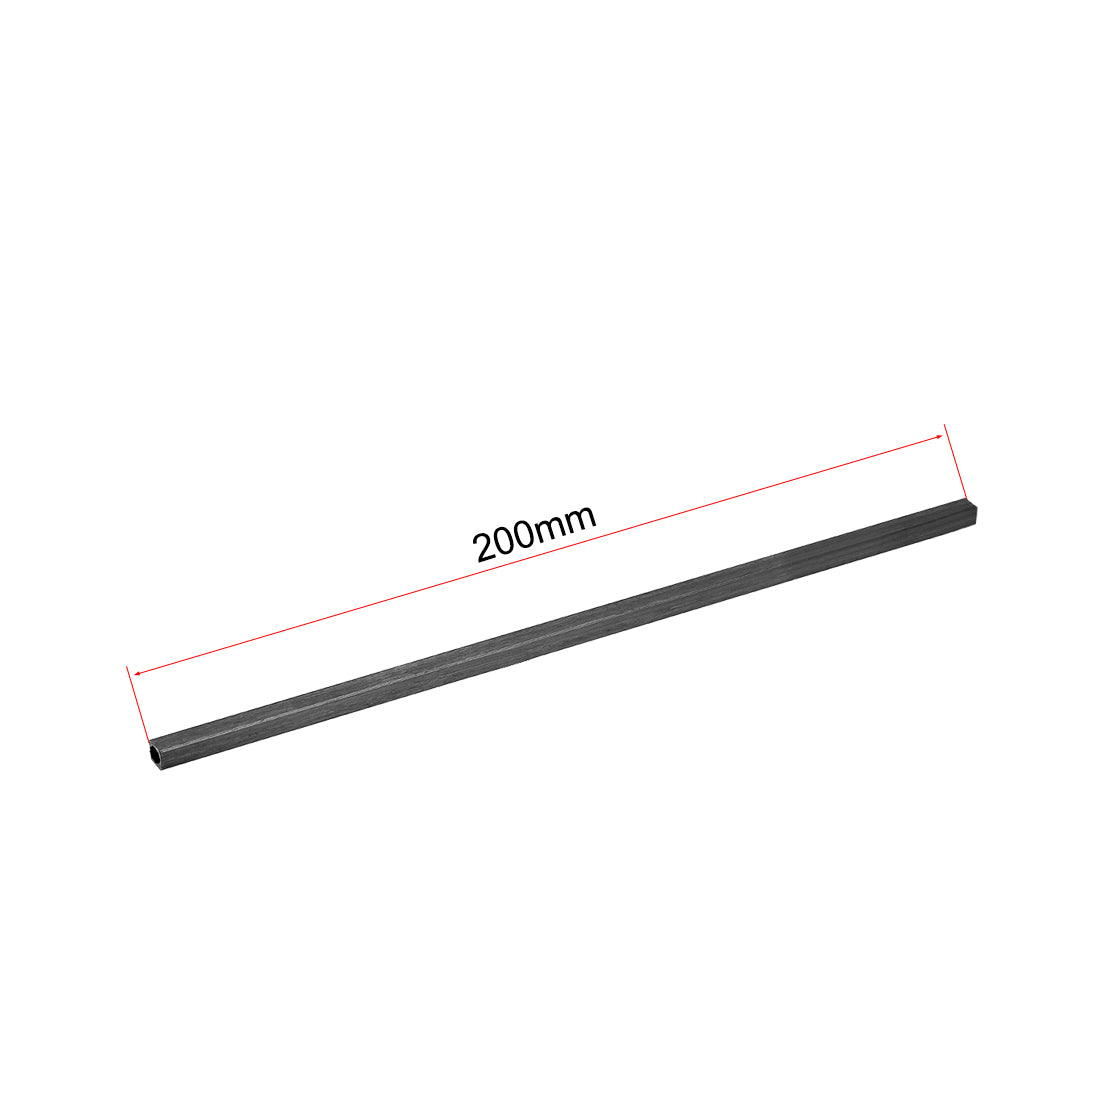 uxcell Uxcell Carbon Fiber Square Tube 5x5x4mm Inner Round Dia. 200mm Length Pultruded Carbon Fiber Tubing for RC Airplane 2 Pcs